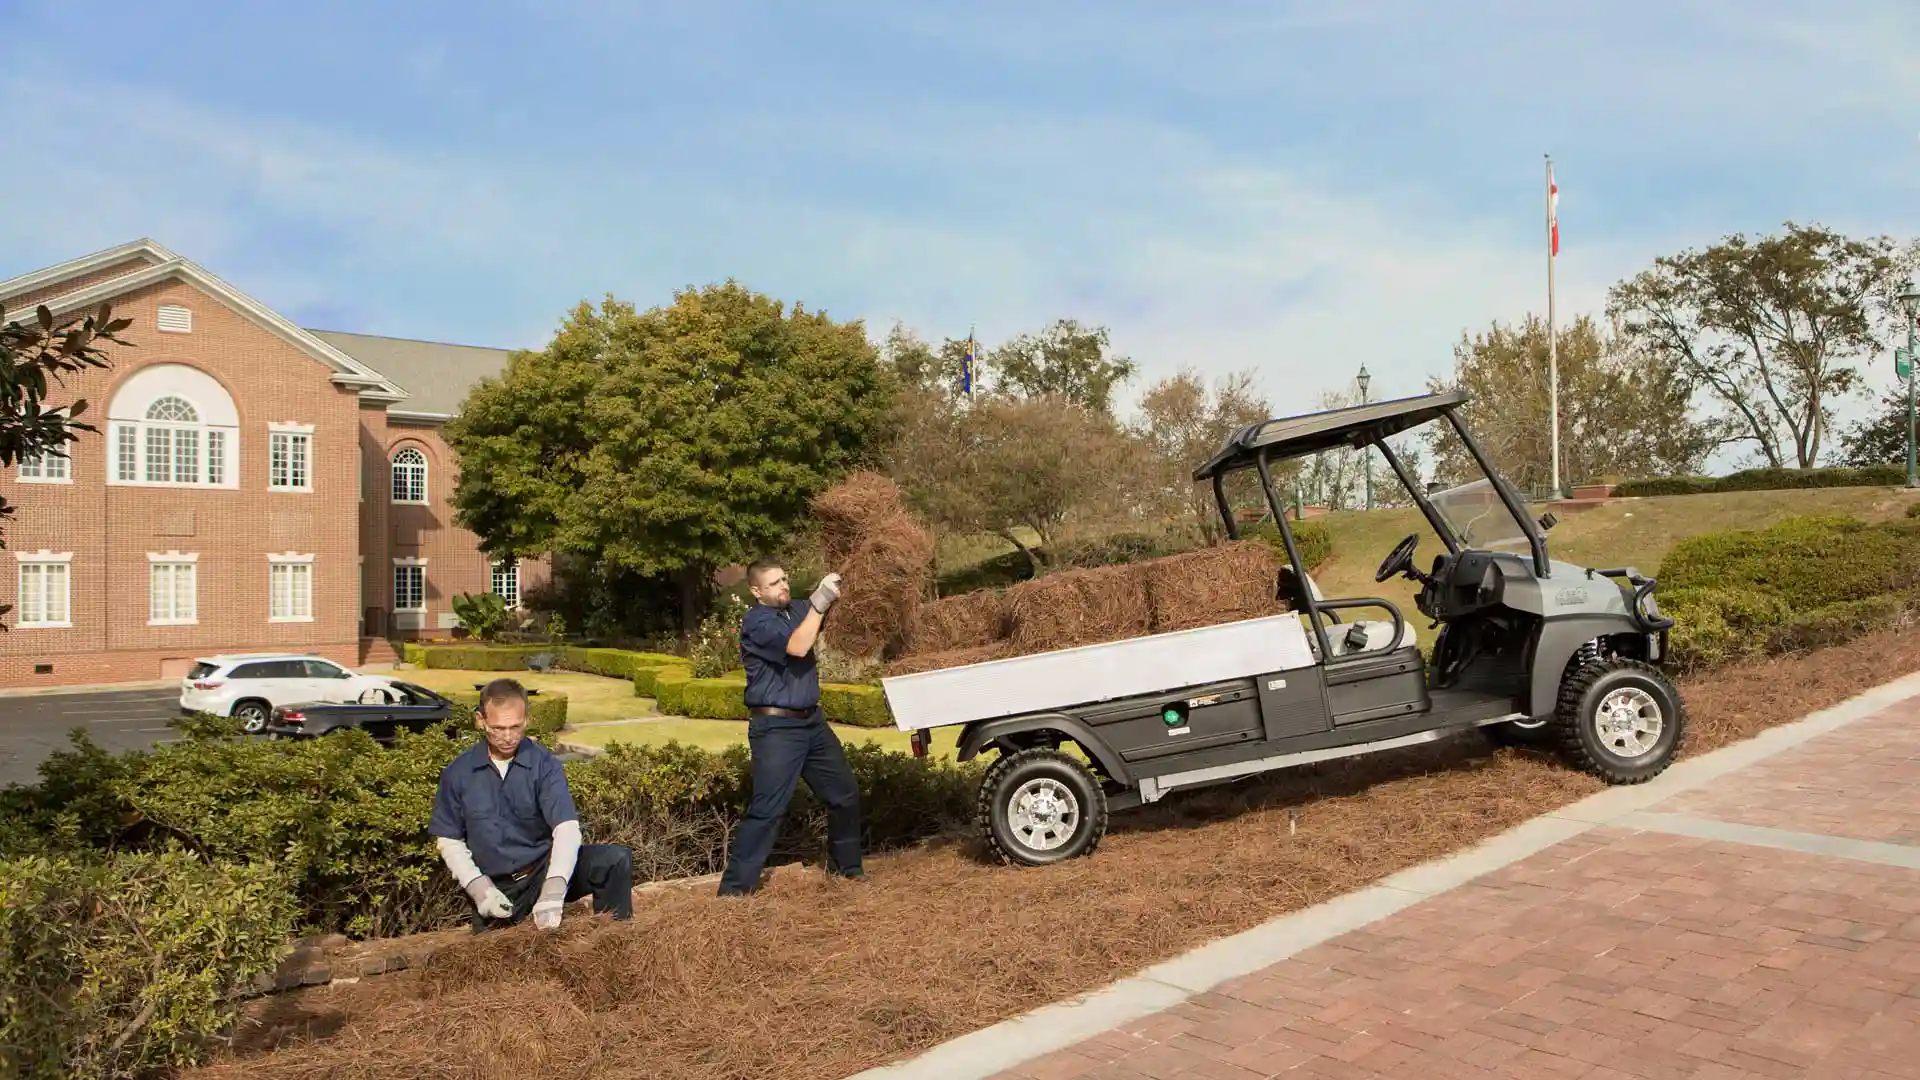 Carryall 1500 4x4 utility vehicle with groundskeeping crew